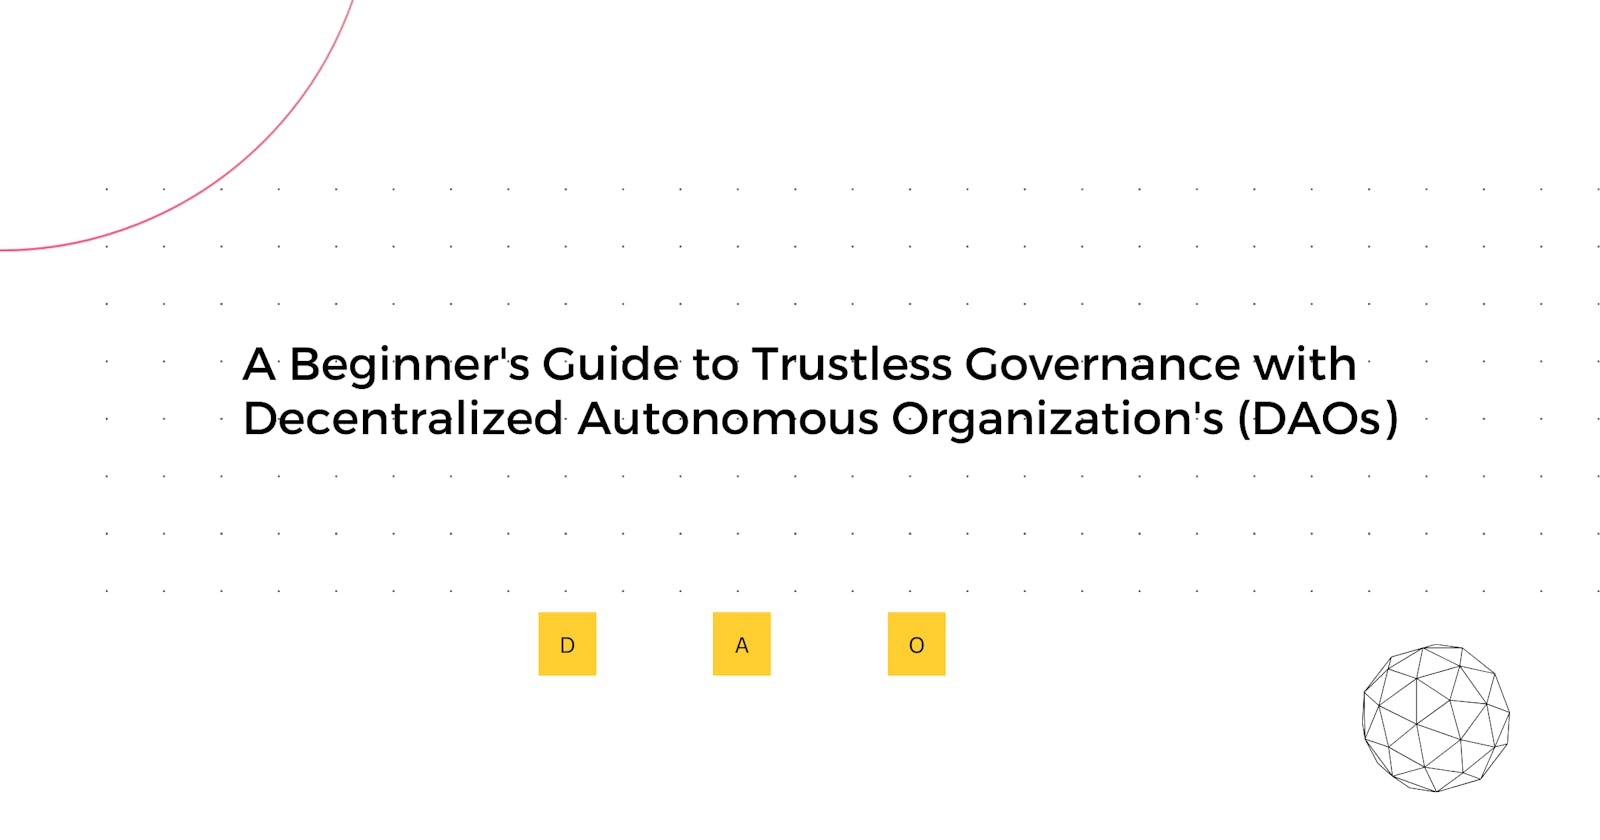 A Beginner's Guide to Trustless Governance with Decentralized Autonomous Organizations(DAOs)